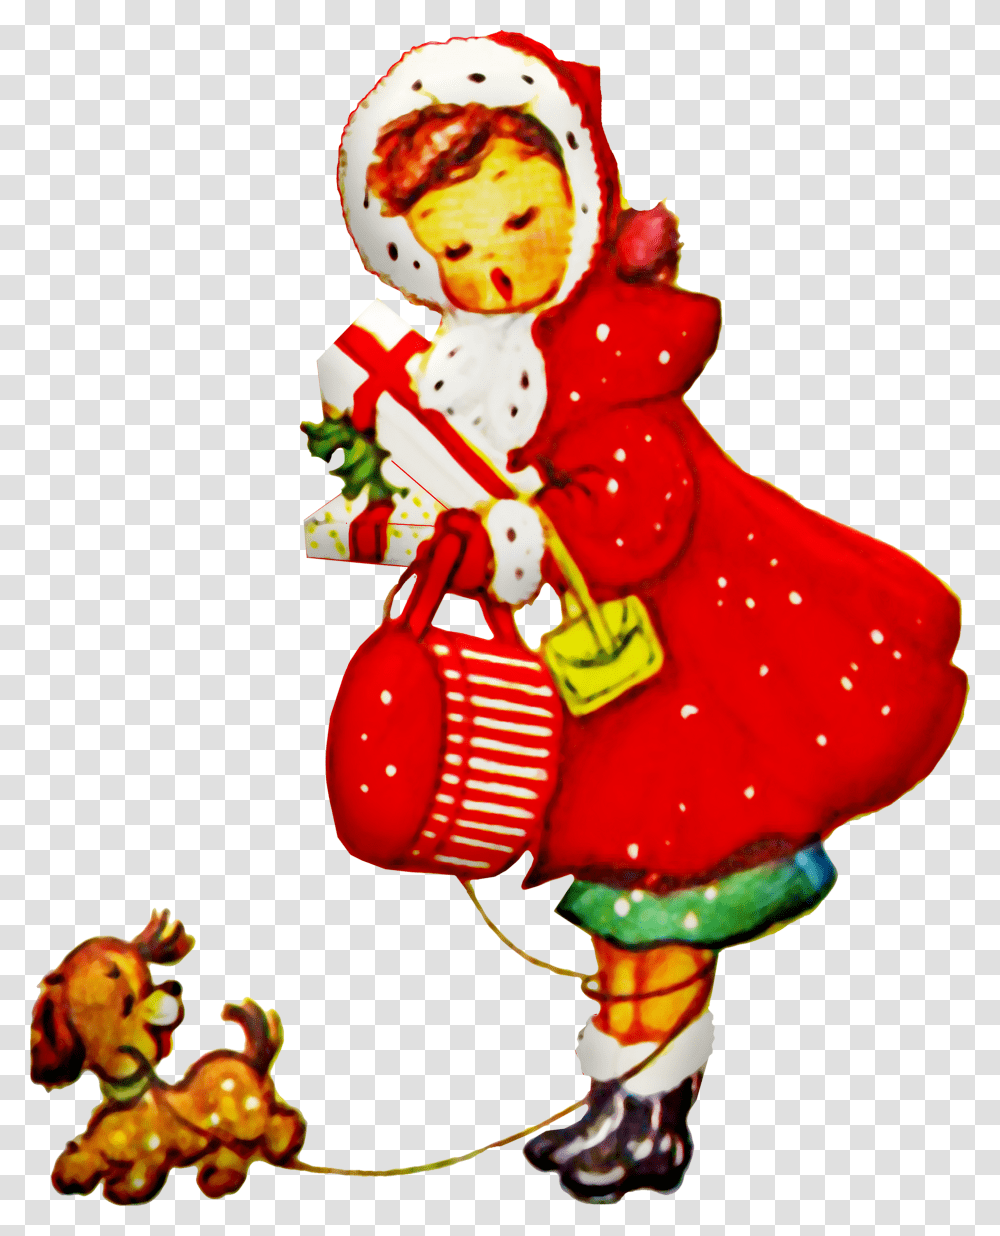 Christmas Gift Bow Free Image On Pixabay Pretty Girl And Dog Vintage Cartoon Card, Nature, Outdoors, Toy, Tree Transparent Png